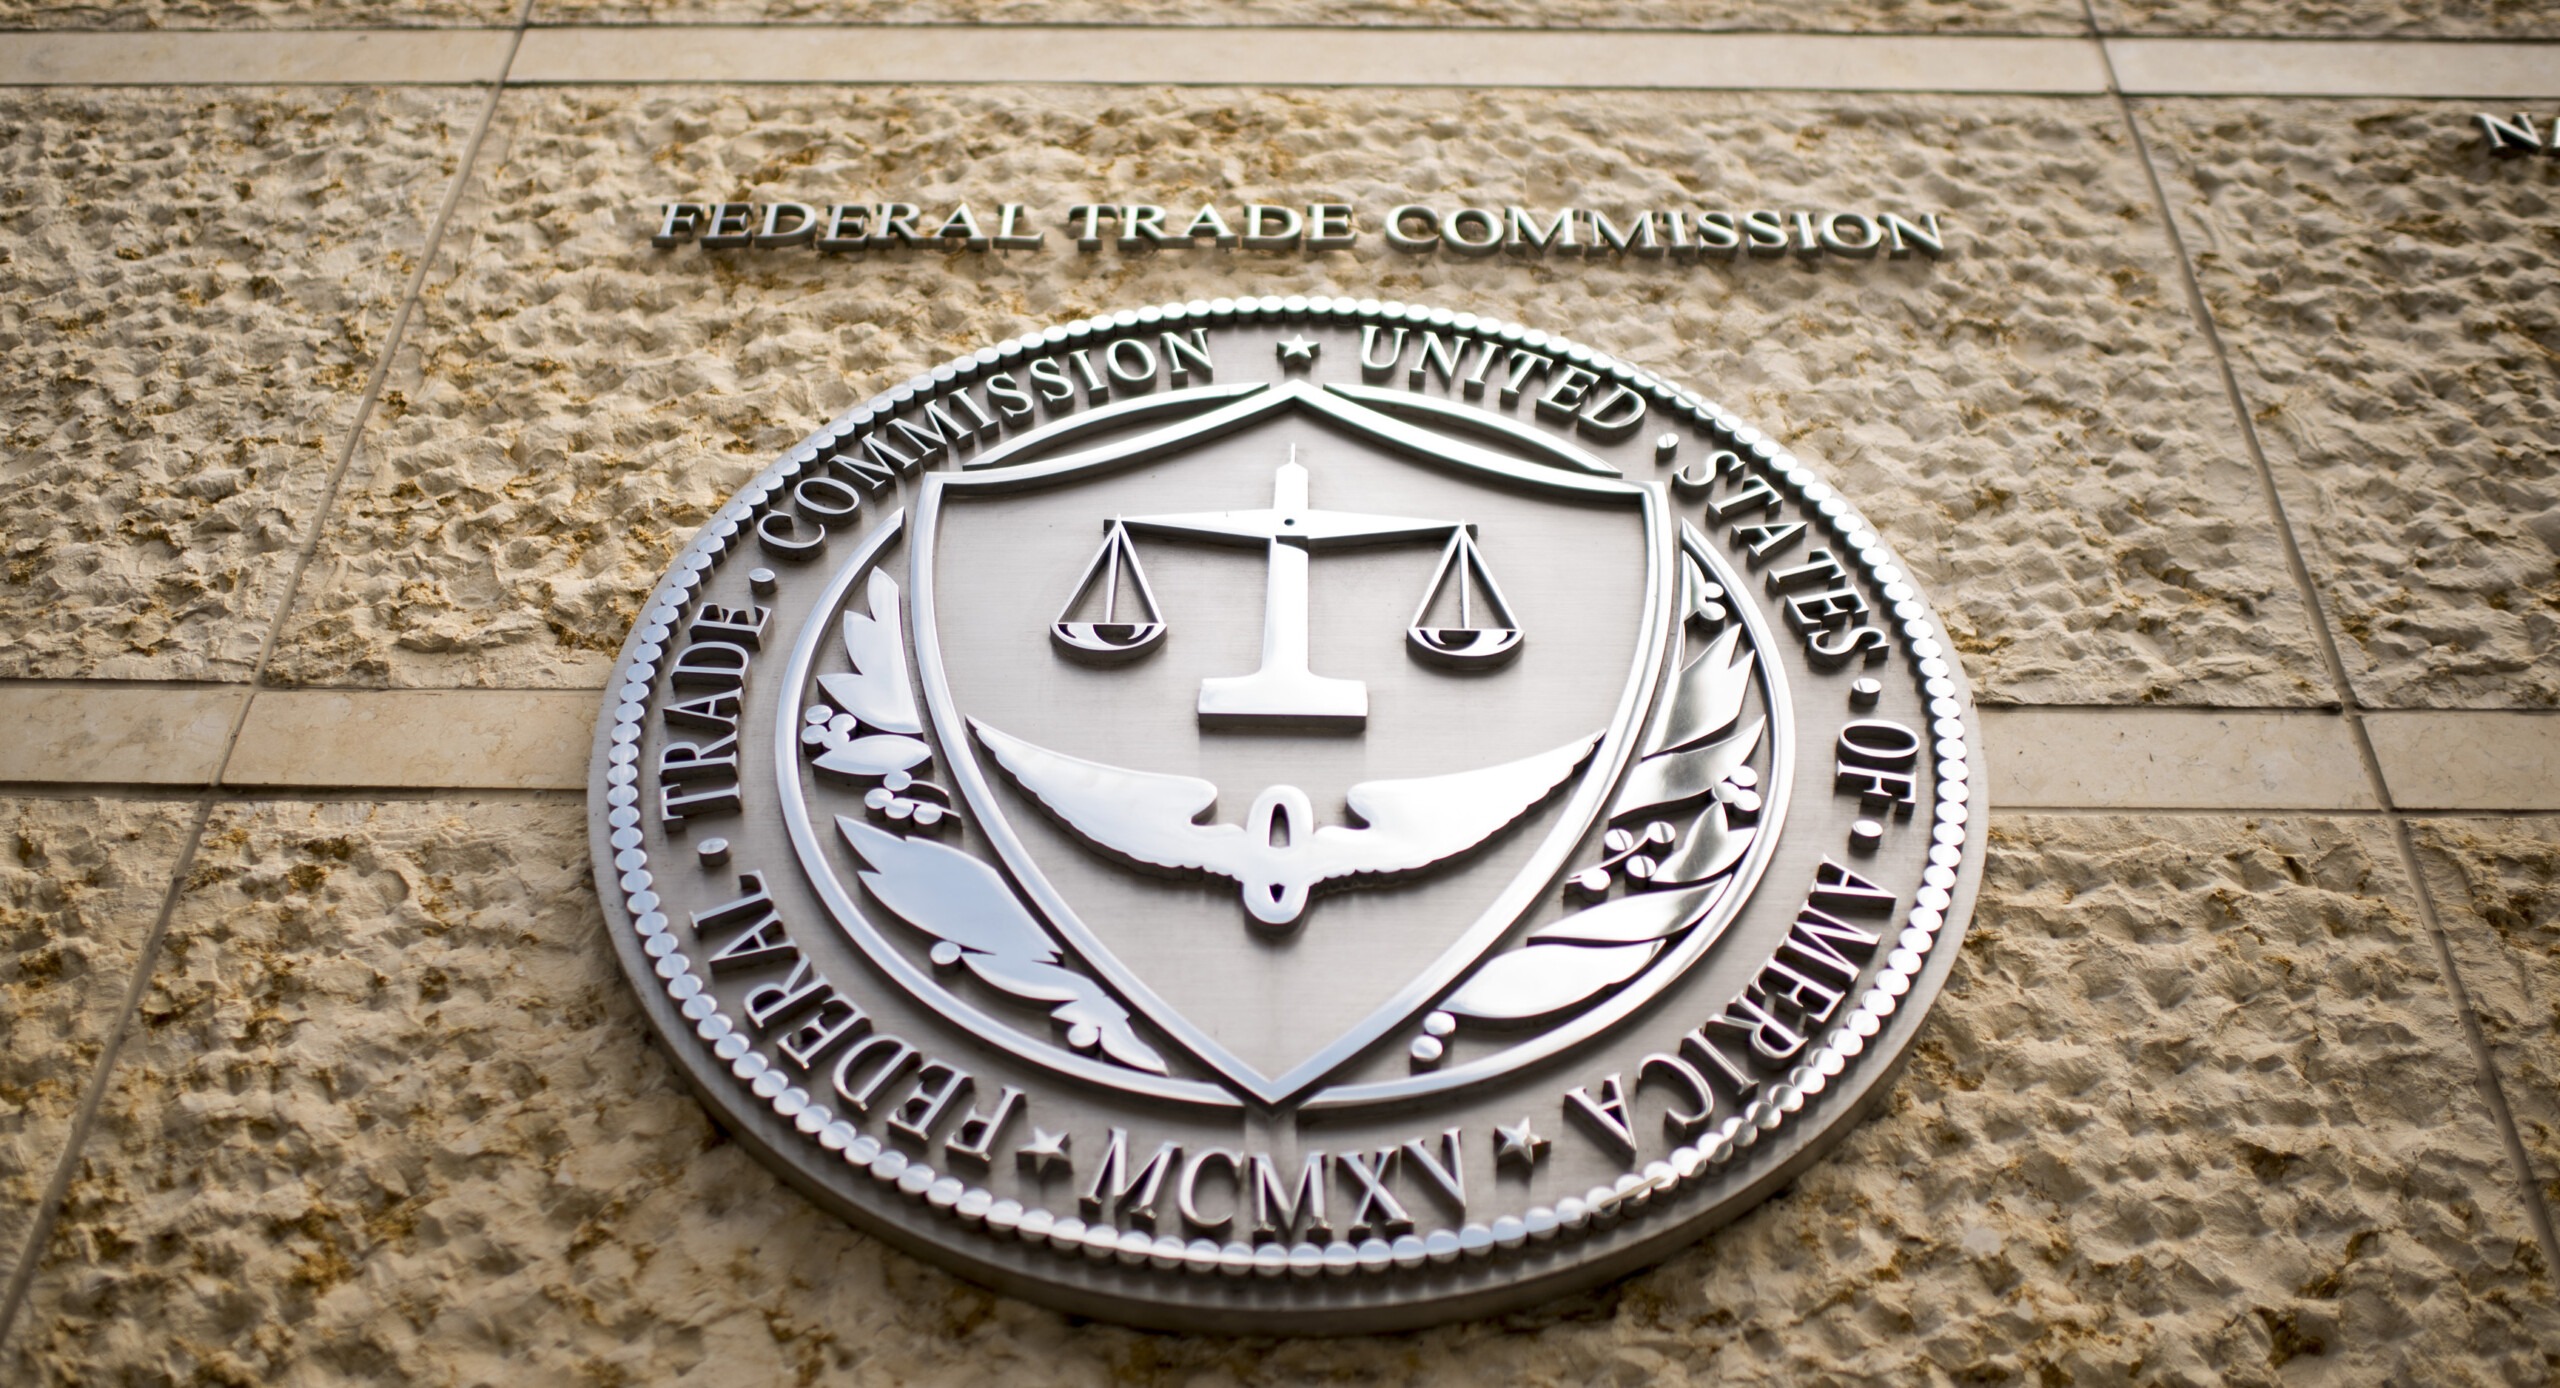 Scam Victim's Petition to the U.S. FTC to Stop Predatory Companies - on ScamsNOW.com